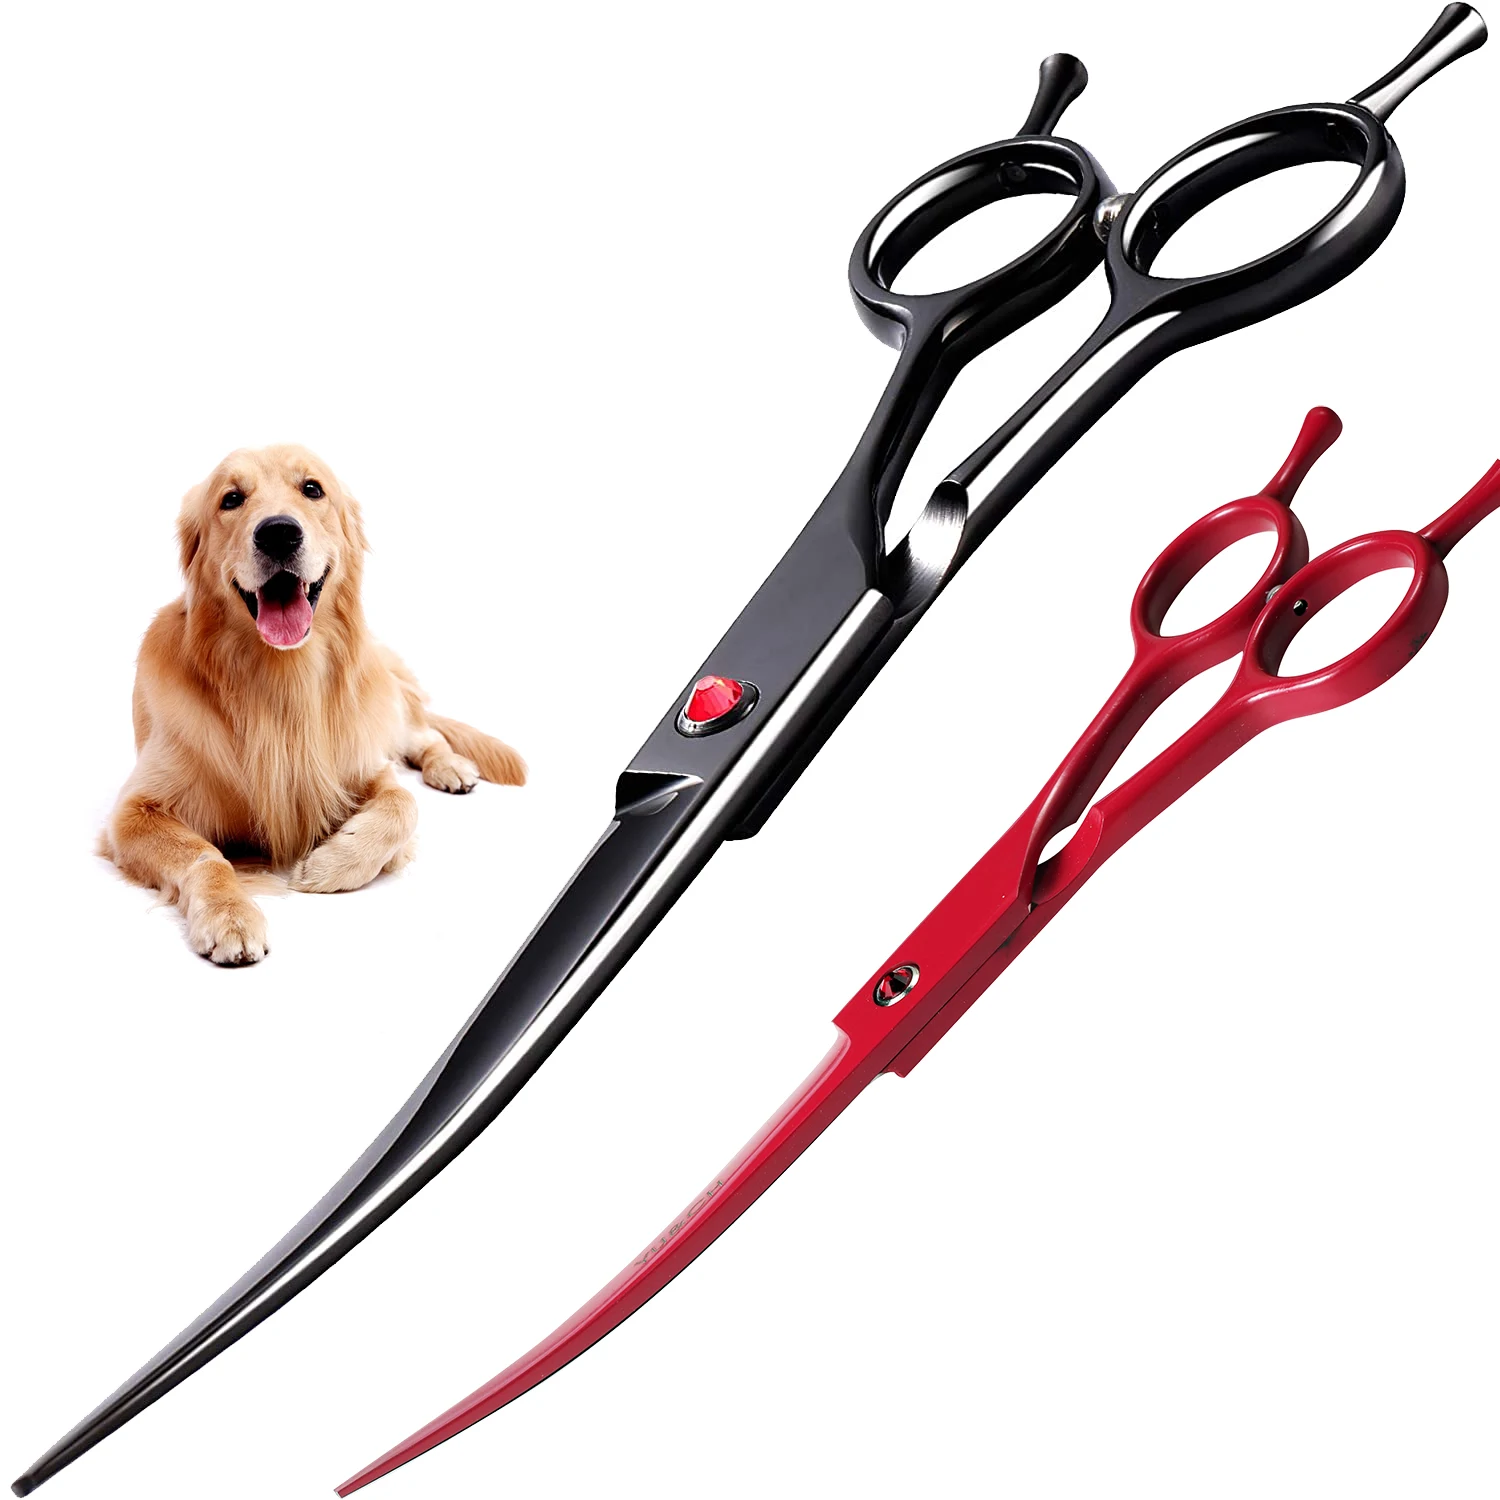 

Hair Grooming Pet Shears Stainless Animal Scissors Pets Available Curved Hand Scissors Cutting Dog Portable Scissors Both Steel